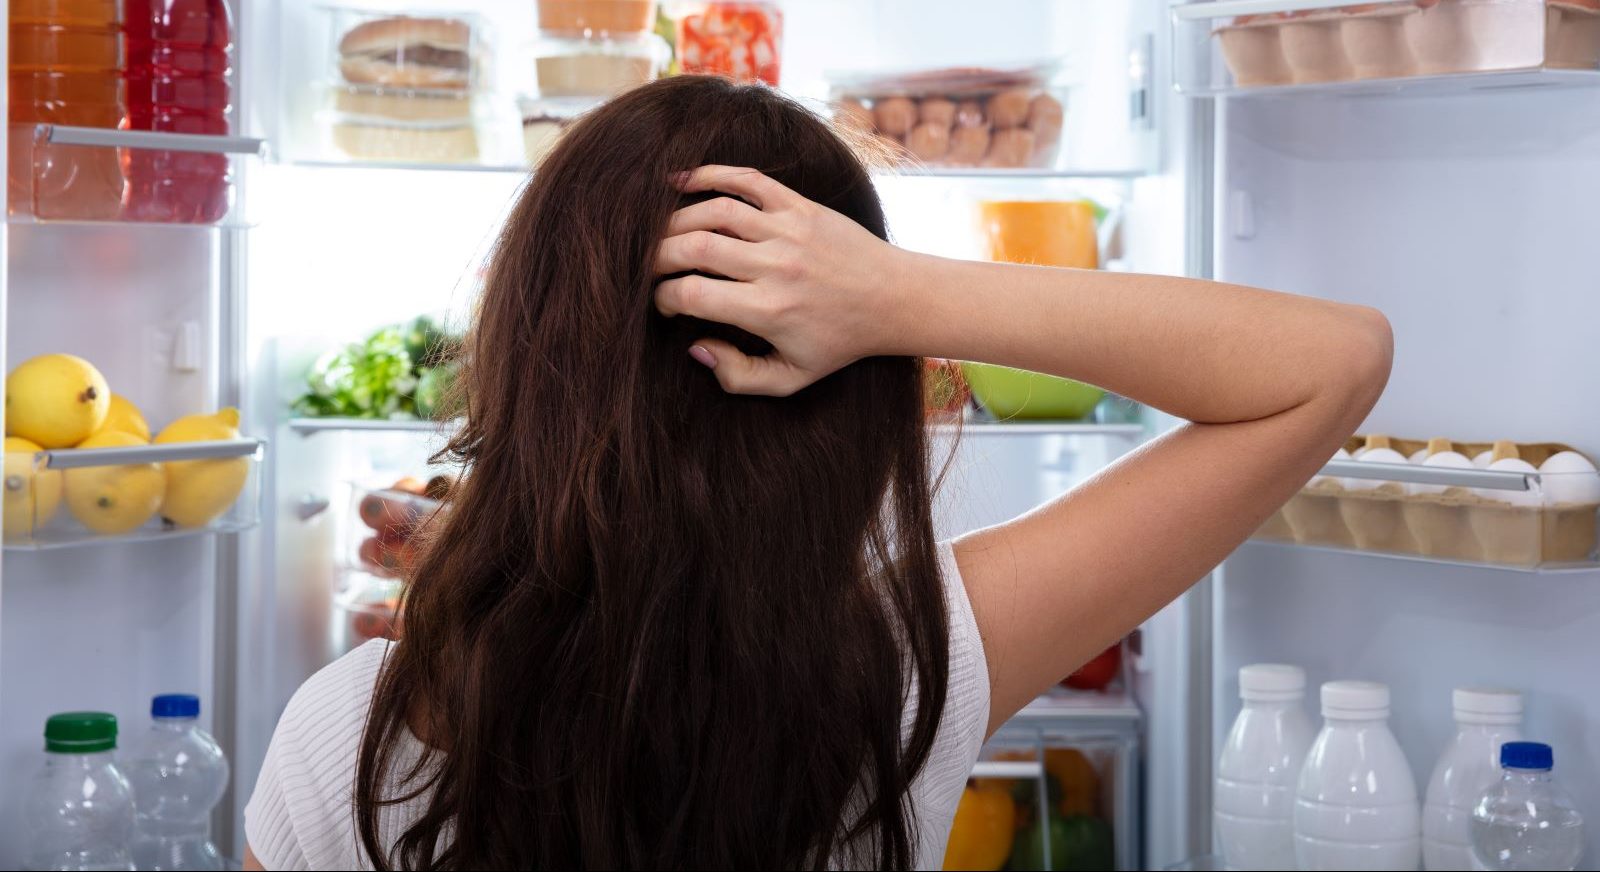 A person looks for food in the fridge.